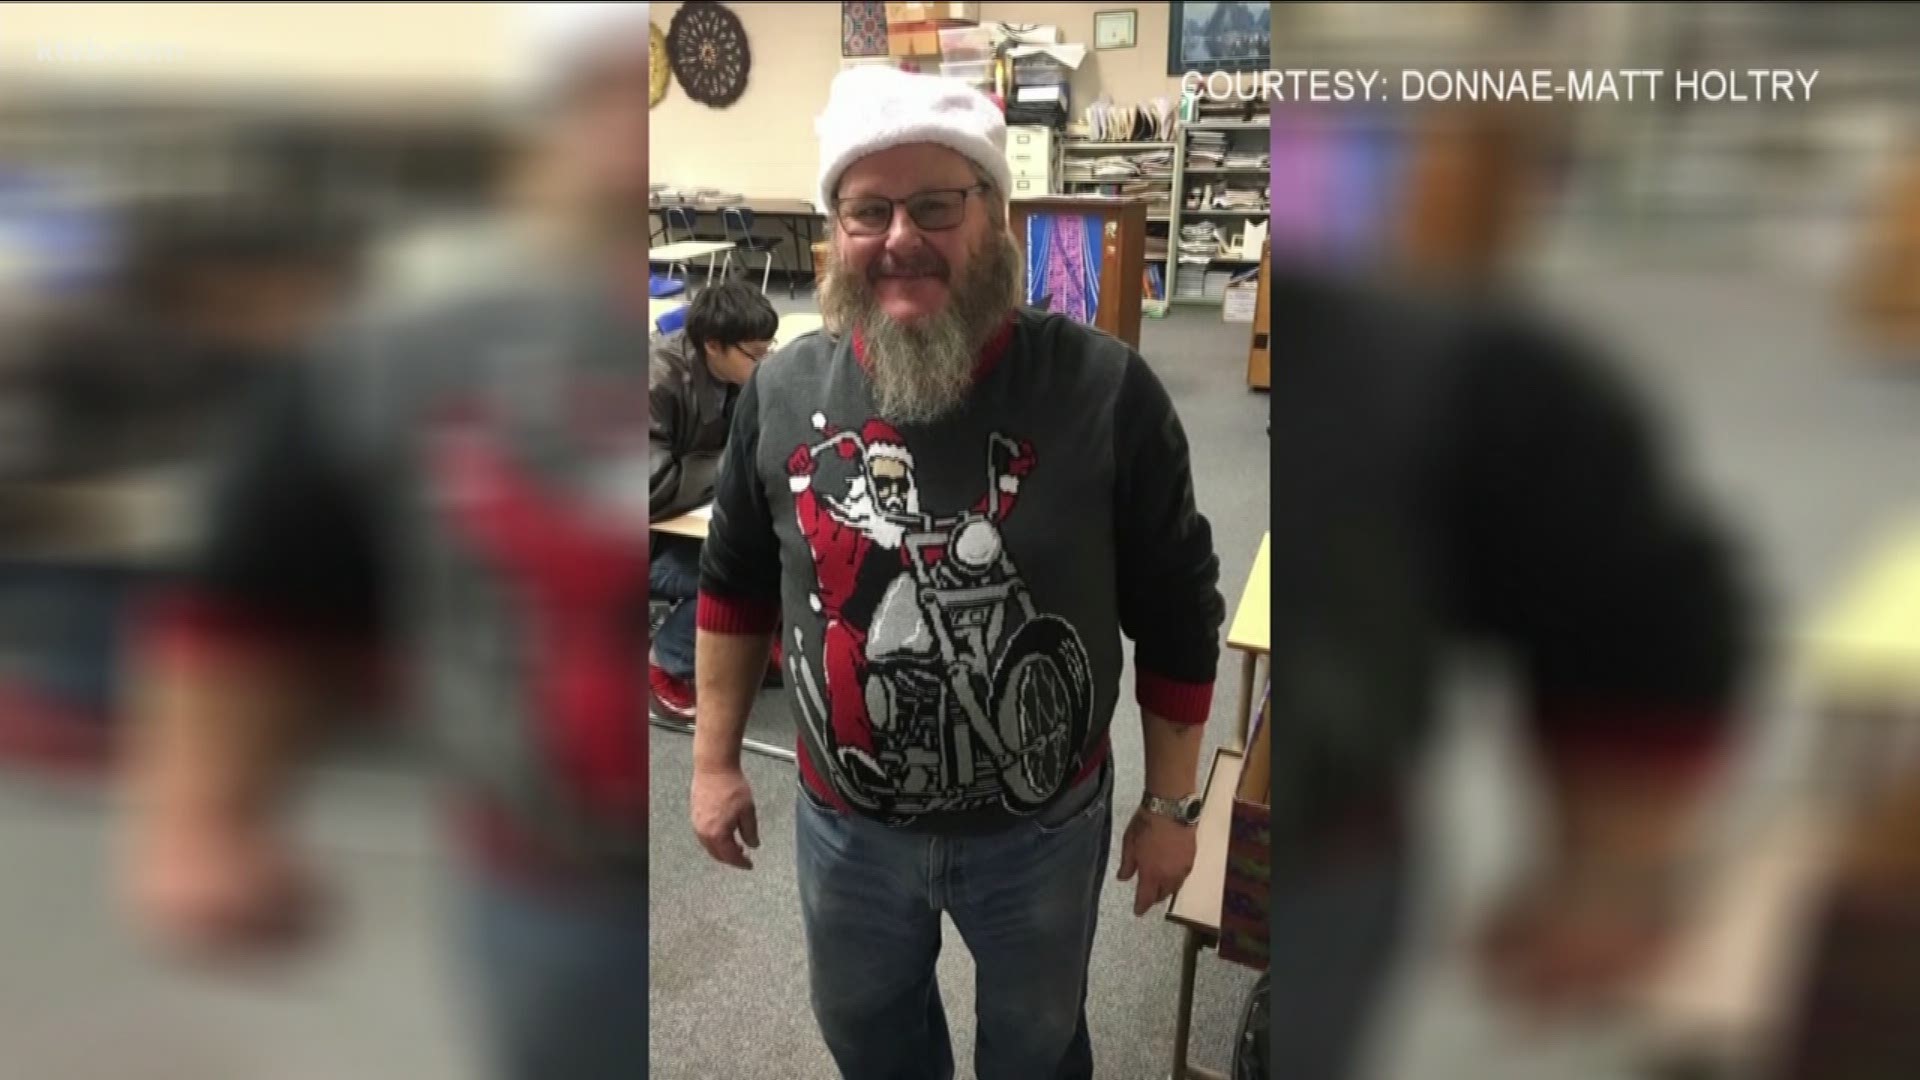 The death of Kenneth Olsen has shocked the small Idaho community.